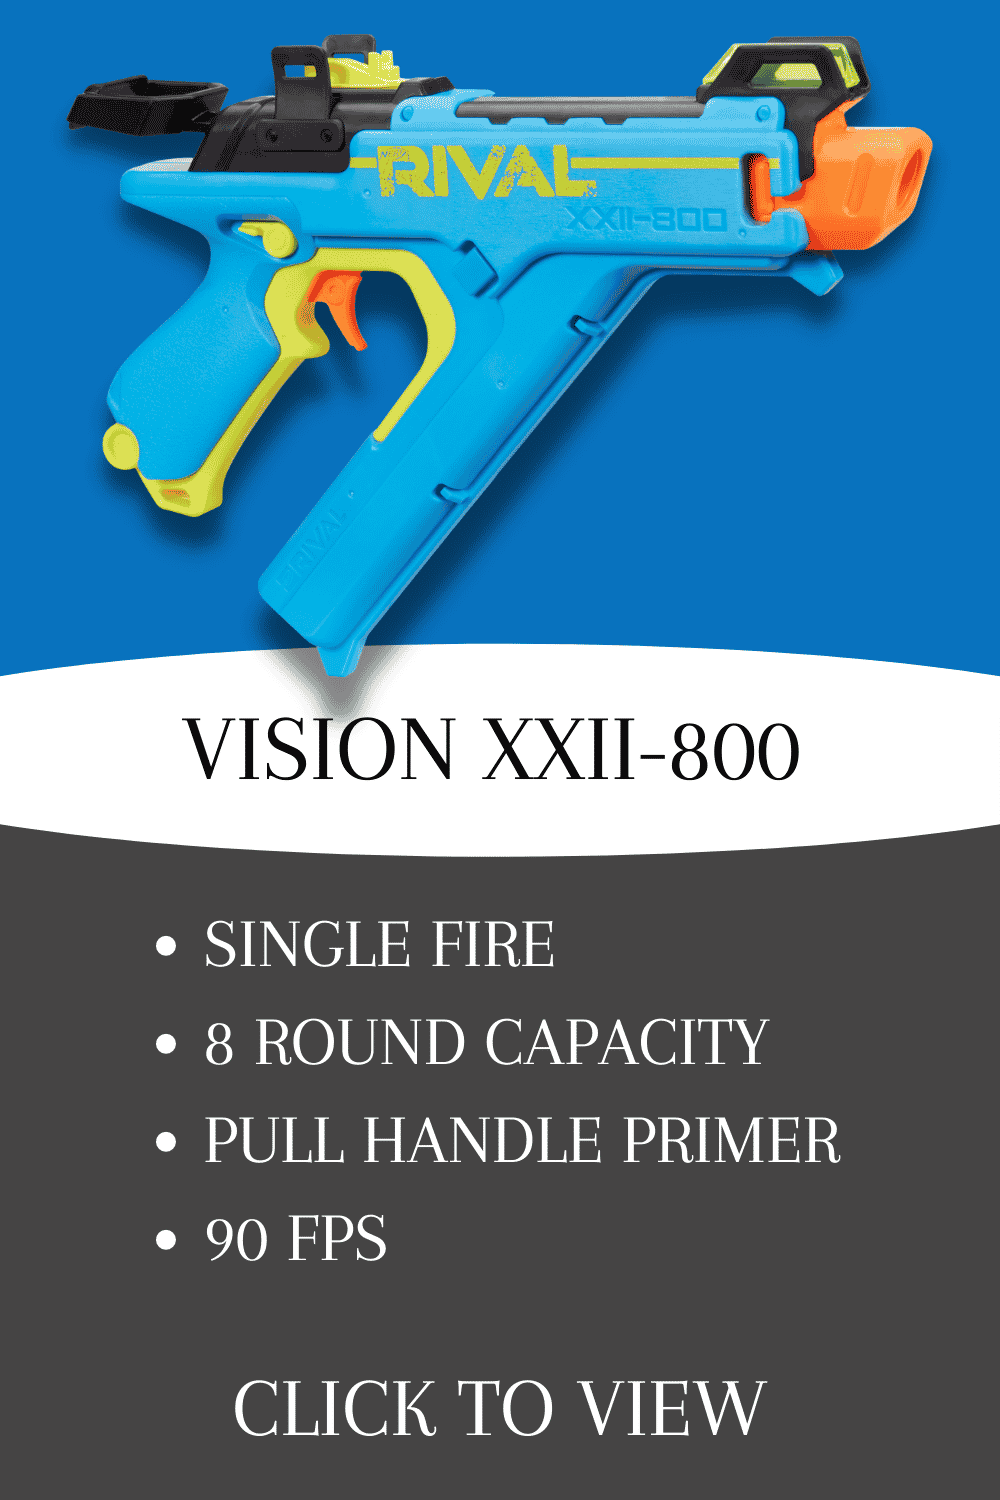 nerf rival vision xxii-800